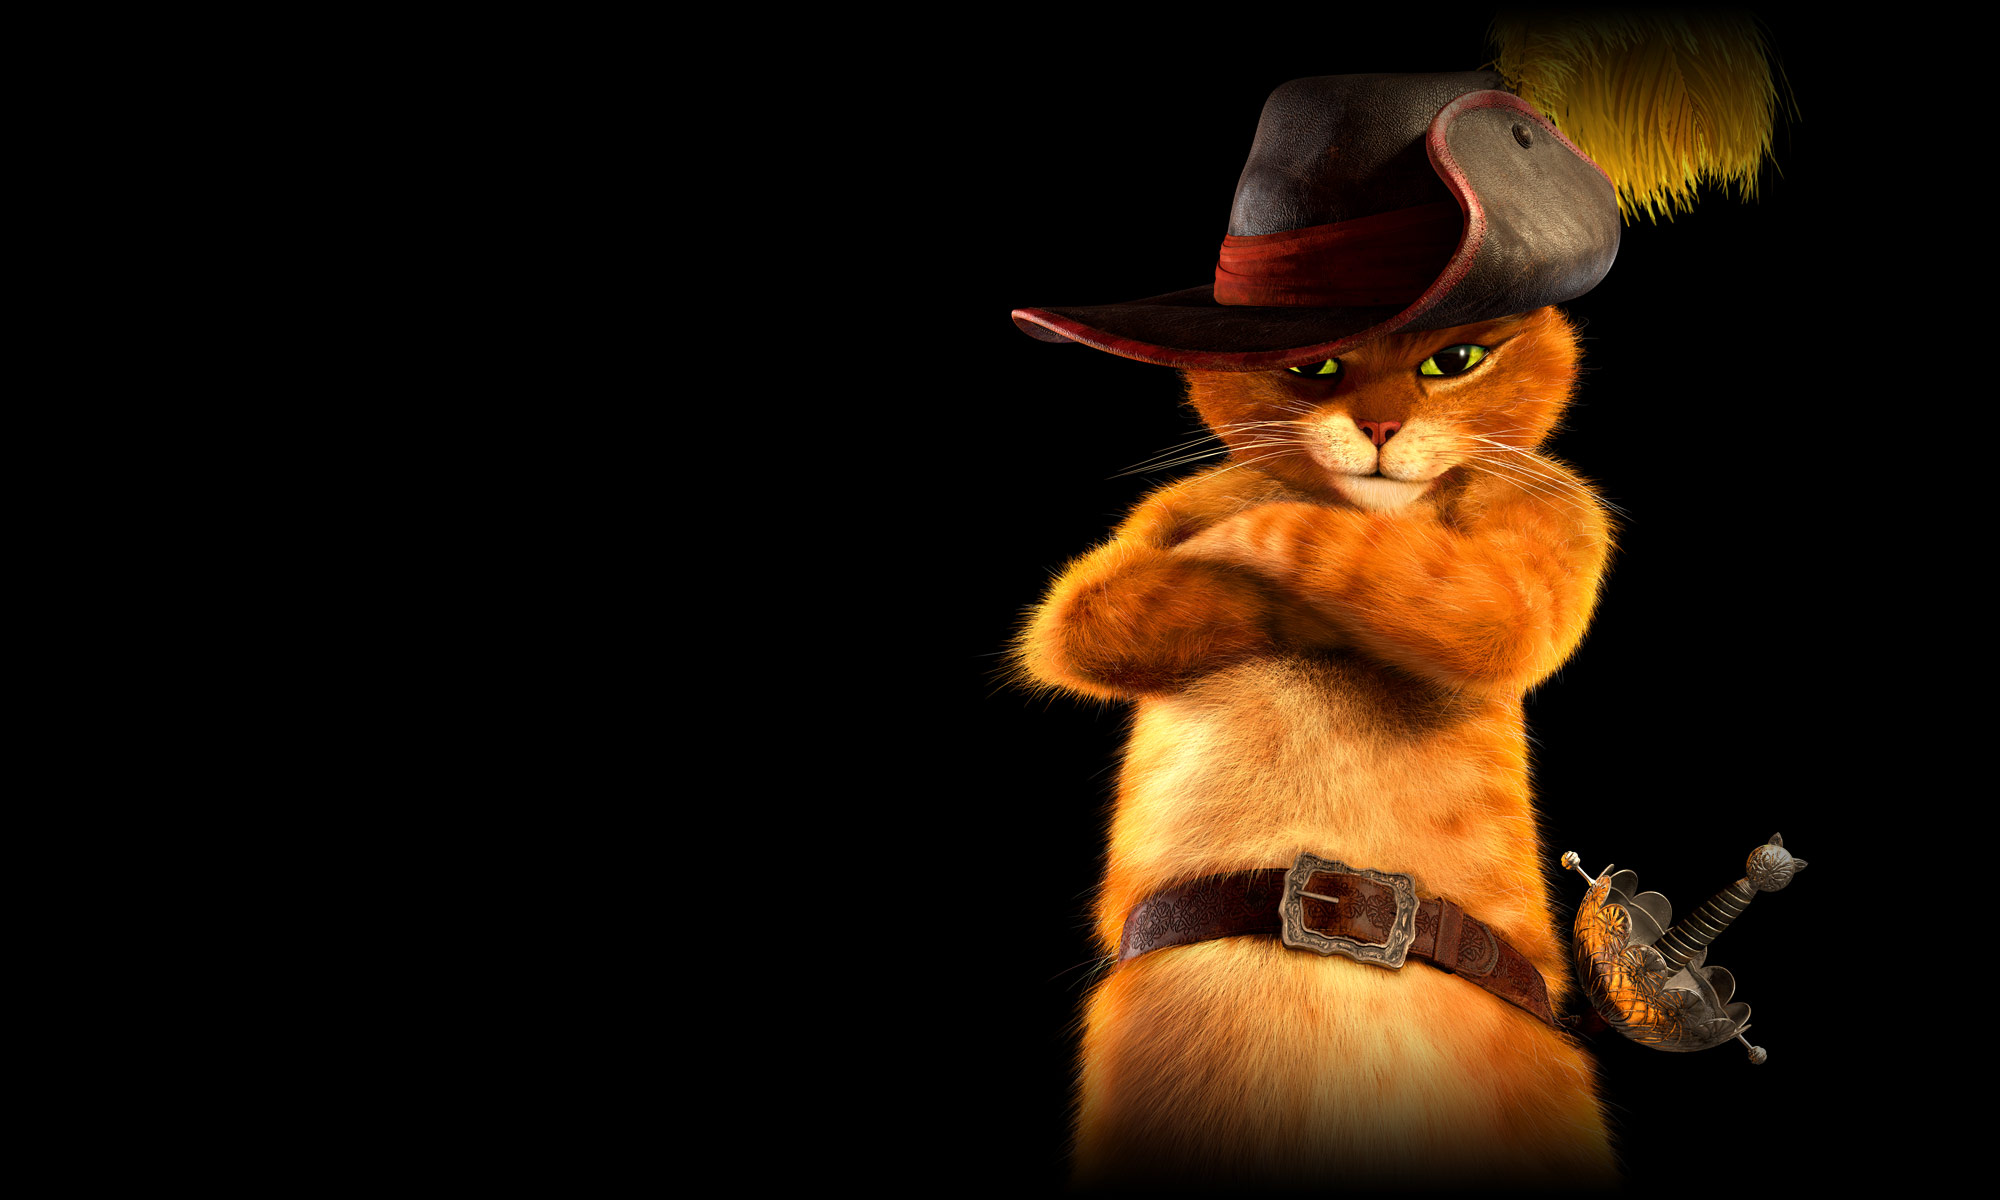 Puss In Boots Backgrounds, Compatible - PC, Mobile, Gadgets| 2000x1200 px